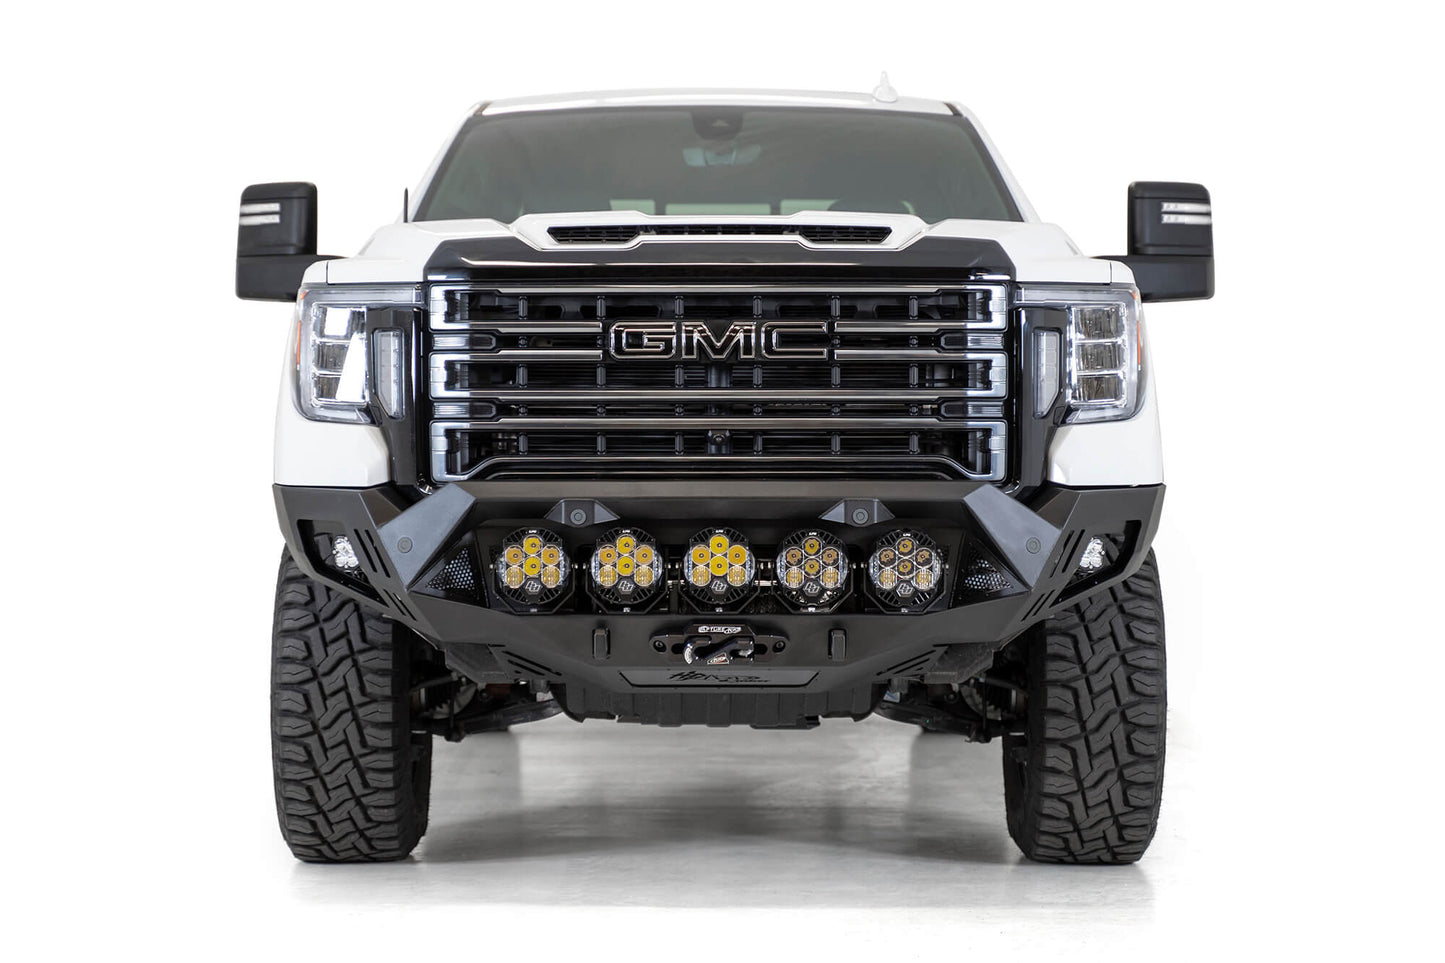 Installed on Car with Amber Round Lights front View ADD GMC Bomber HD Front Bumper | 2020-2023 Sierra 2500/3500